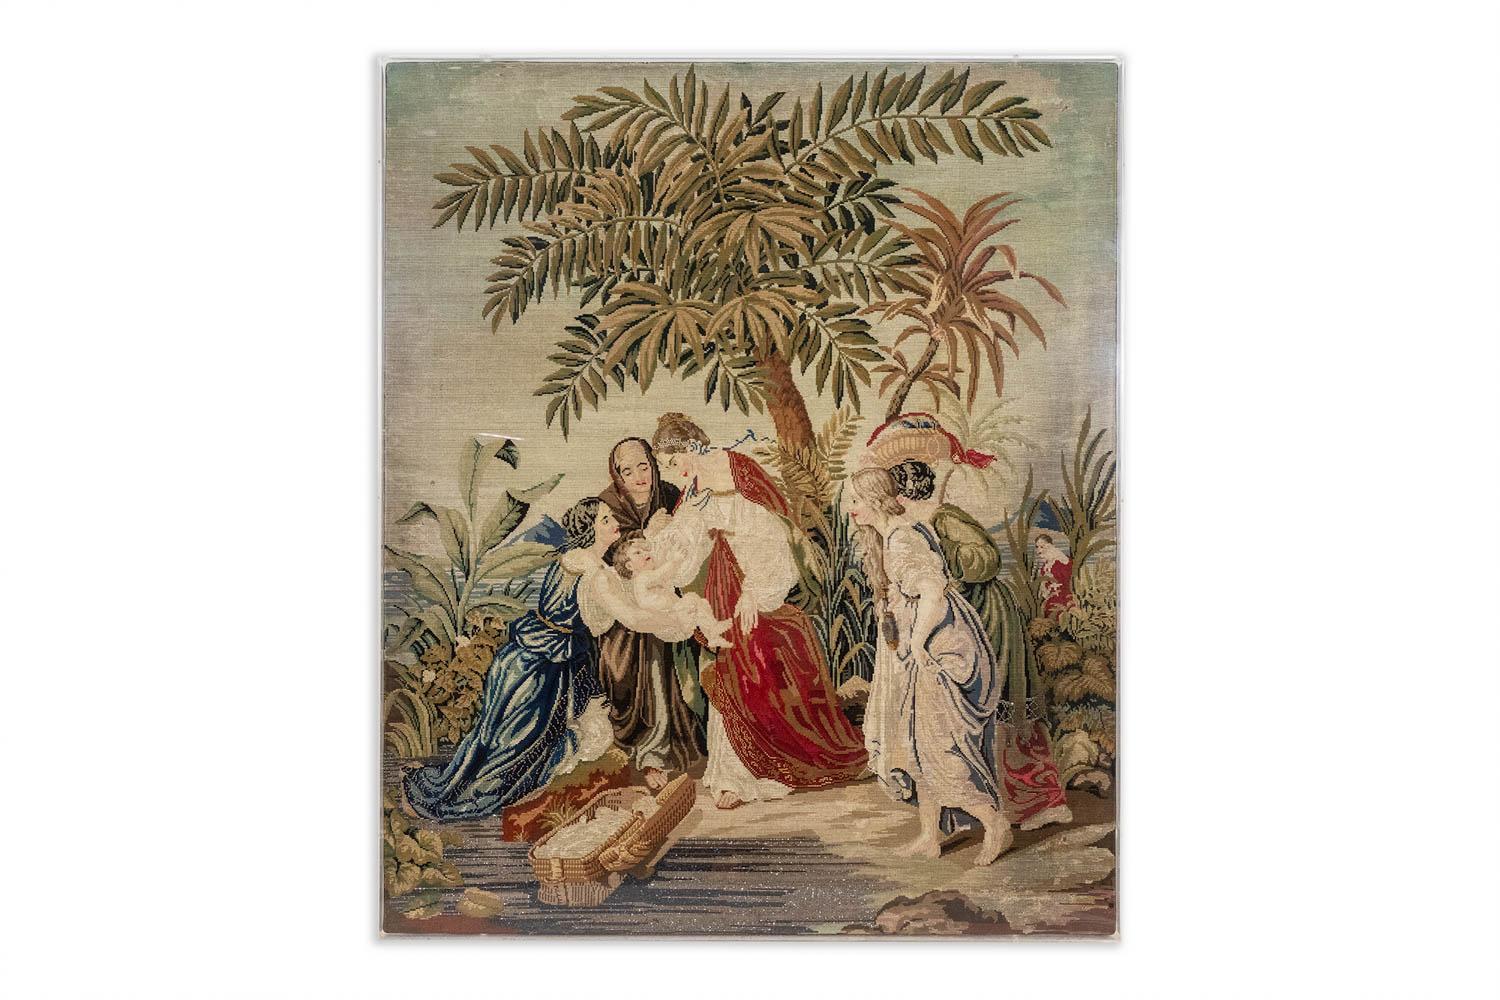 Petit point tapestry representing an orientalist scene, in its Plexiglas casing.

French work realized circa 1880.

Dimensions: H 126 x W 106 x D 5,5 cm

Reference: LS5995439G